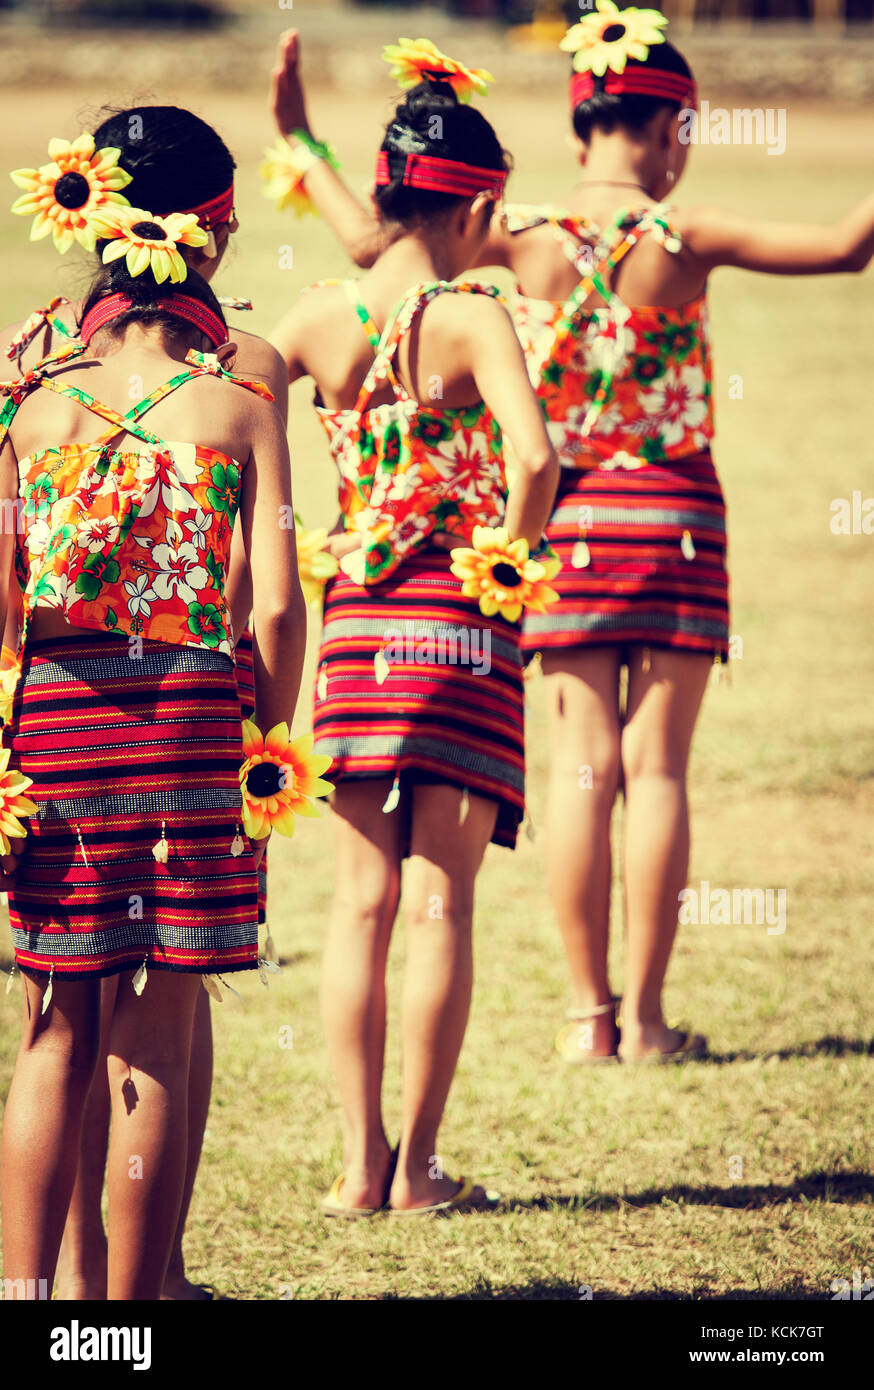 Filipino girls prepare to dance at the Panagbenga Festival (Blooming Flowers Festival) or the Baguio Flower Festival in colorful tribal costume Stock Photo